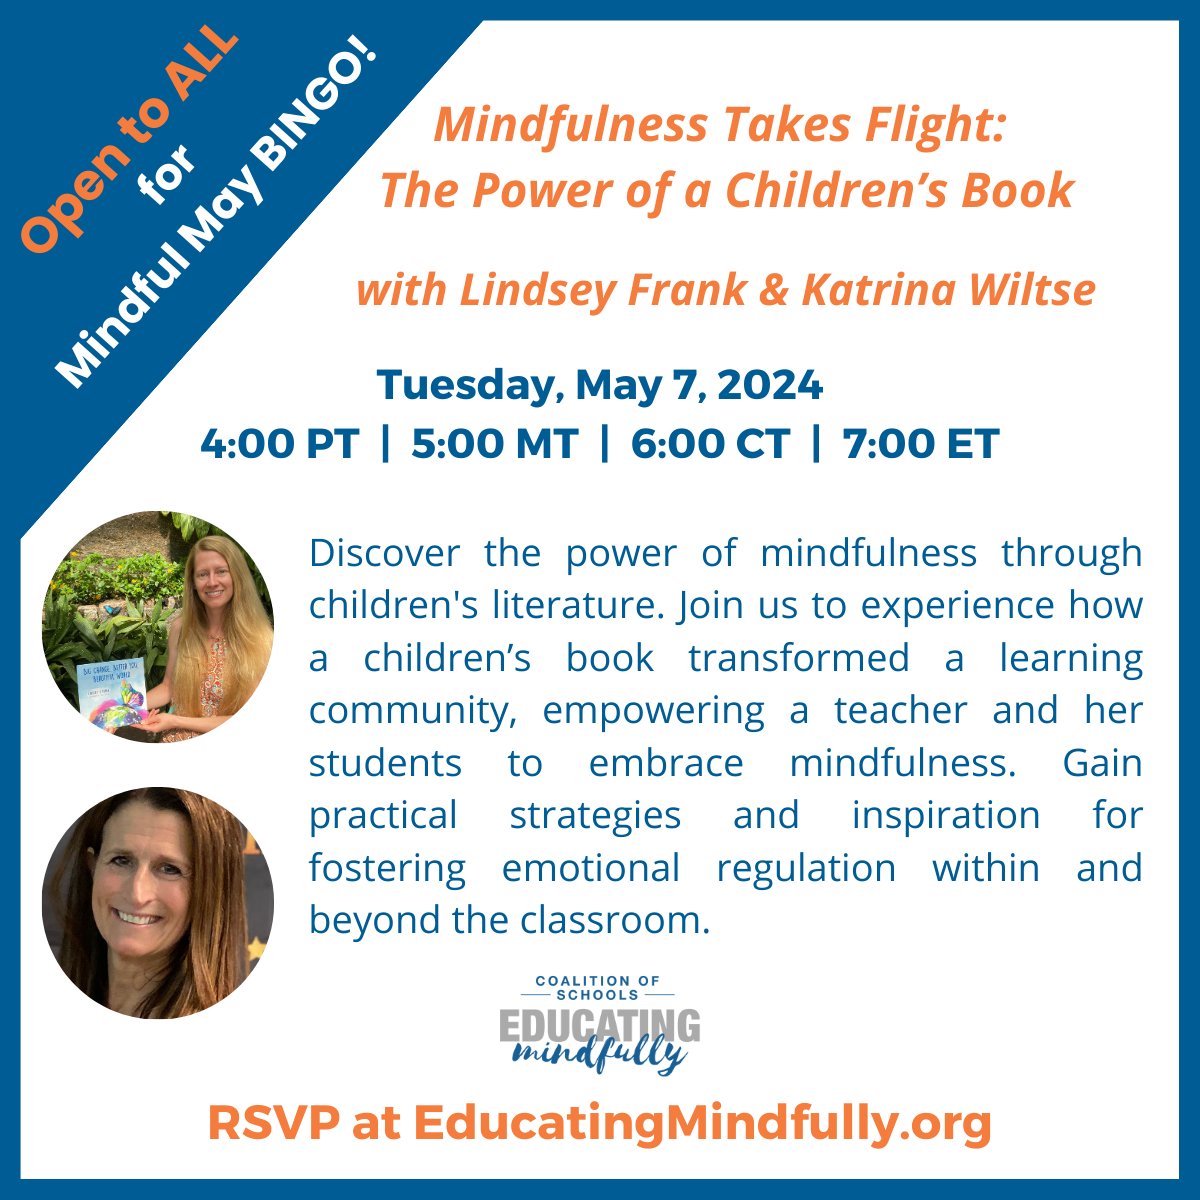 Come to our Mindful May Member Event to see what COSEM is all about! Register at the Zoom link to add to your Mindful May BINGO card 🌟 #Mindfuless #SocialEmotionalLearning #SEL #ChildrensBooks #Mindful #MBSEL #Education #MindfulLeaders #MindfulnessInEducation #MindfulEvent